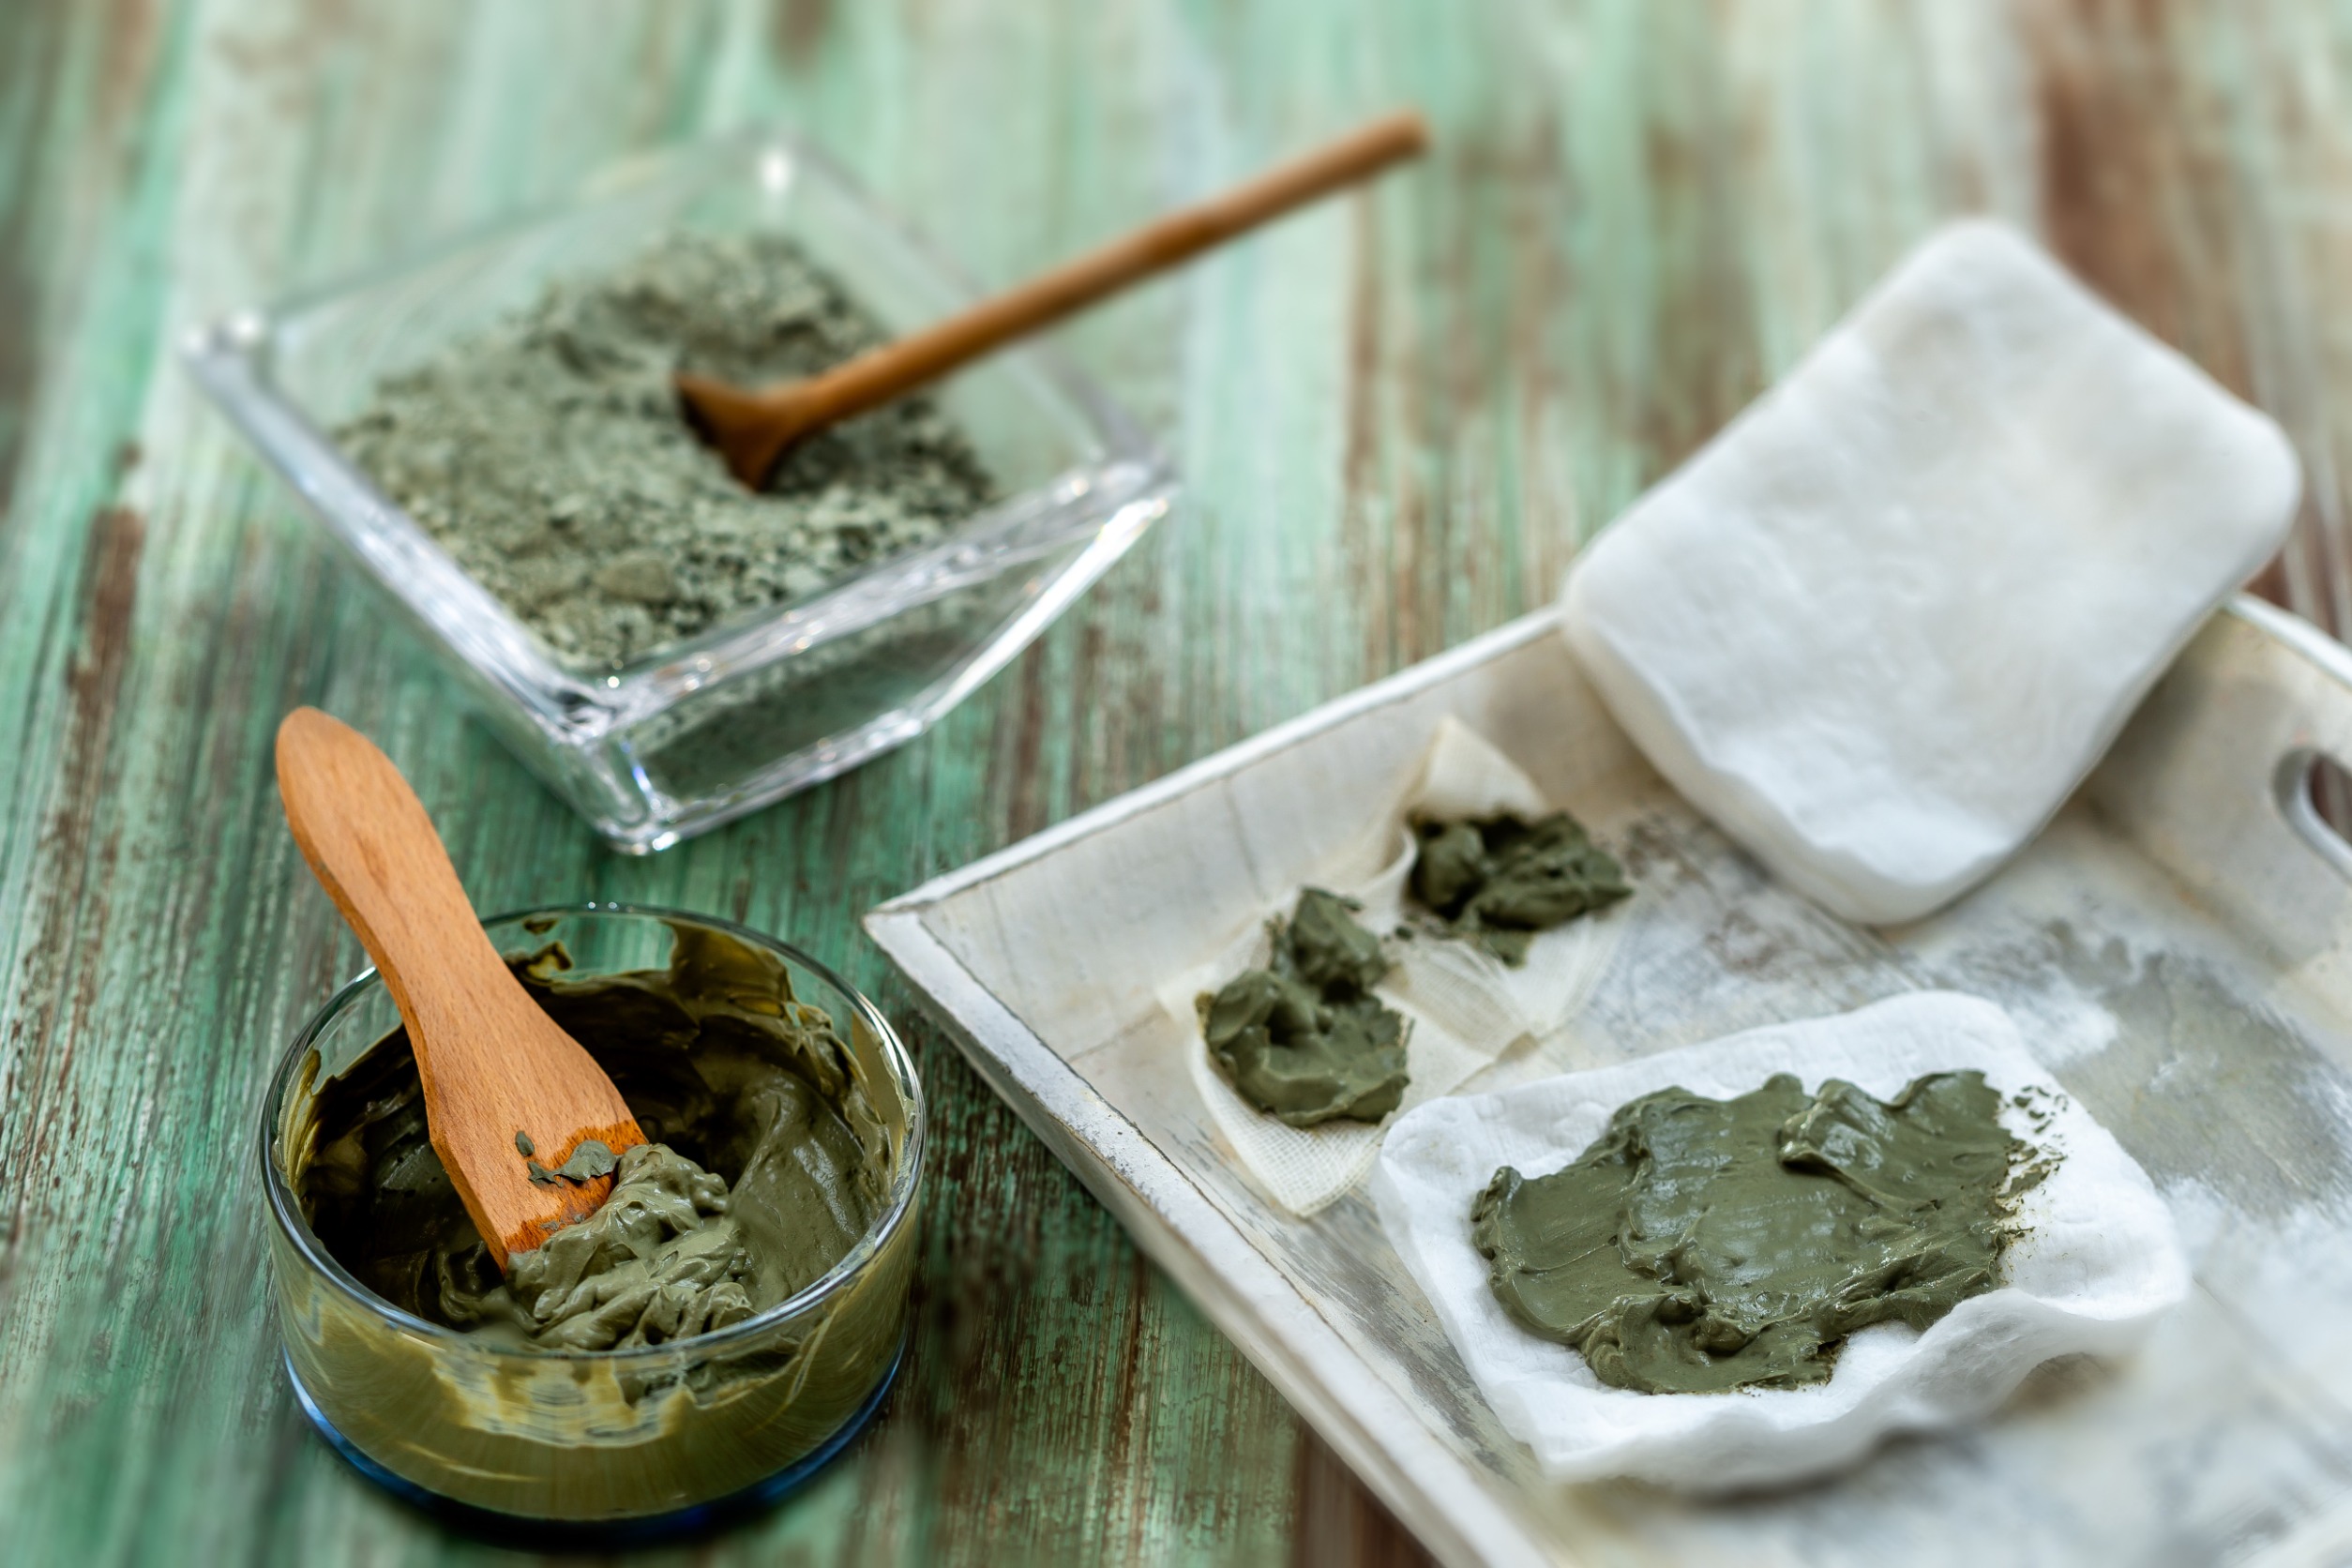 The Top 3 Benefits of Green Clay You Should Know